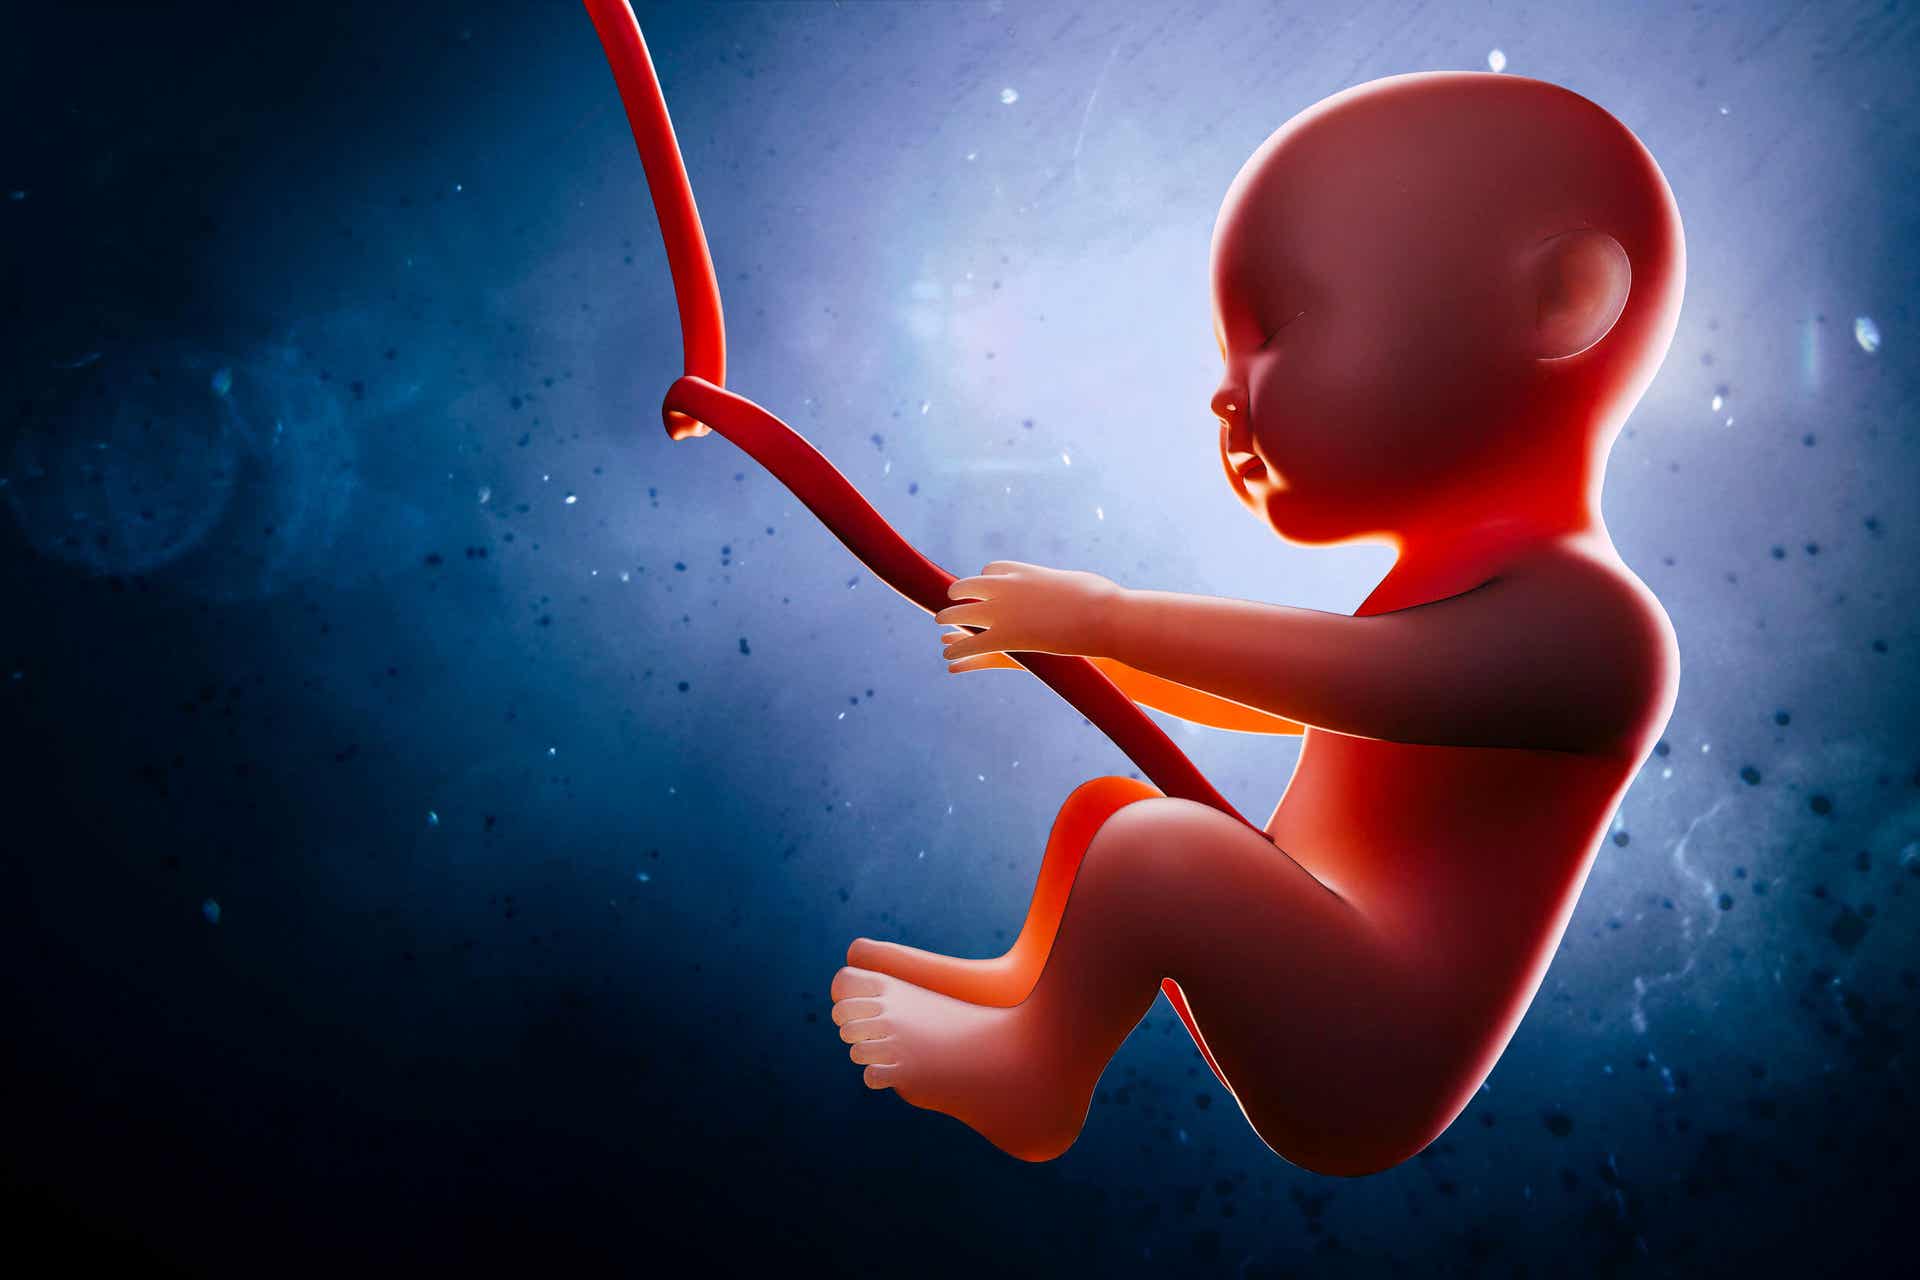 A computer illustration of a baby floating in amniotic fluid.